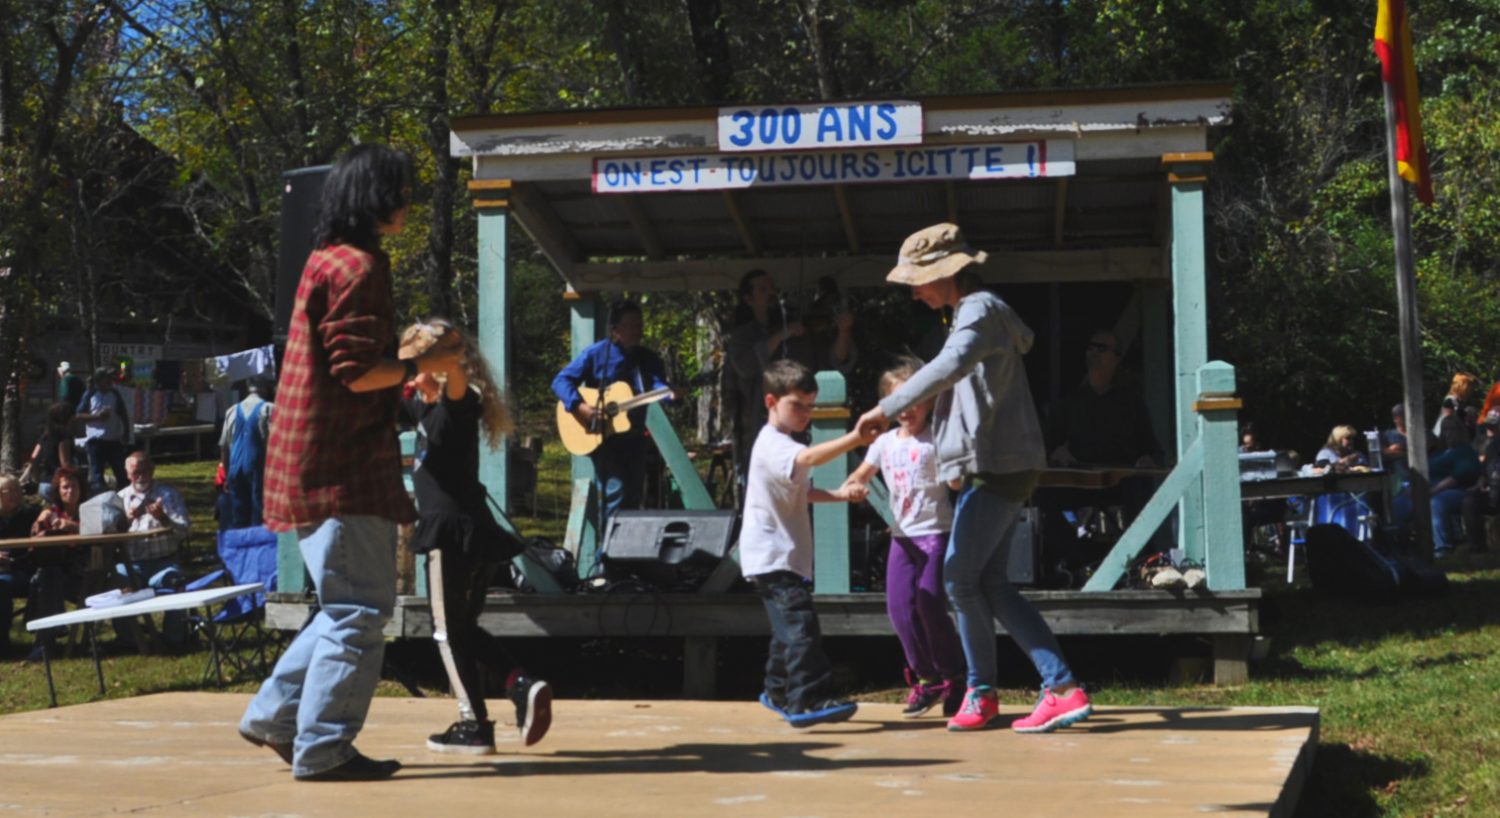 Old Mines: The Fall Festival included many celebratory activities including music and dancing and was a way for the people to embrace their French heritage.
Tim Wilhelm / News Editor